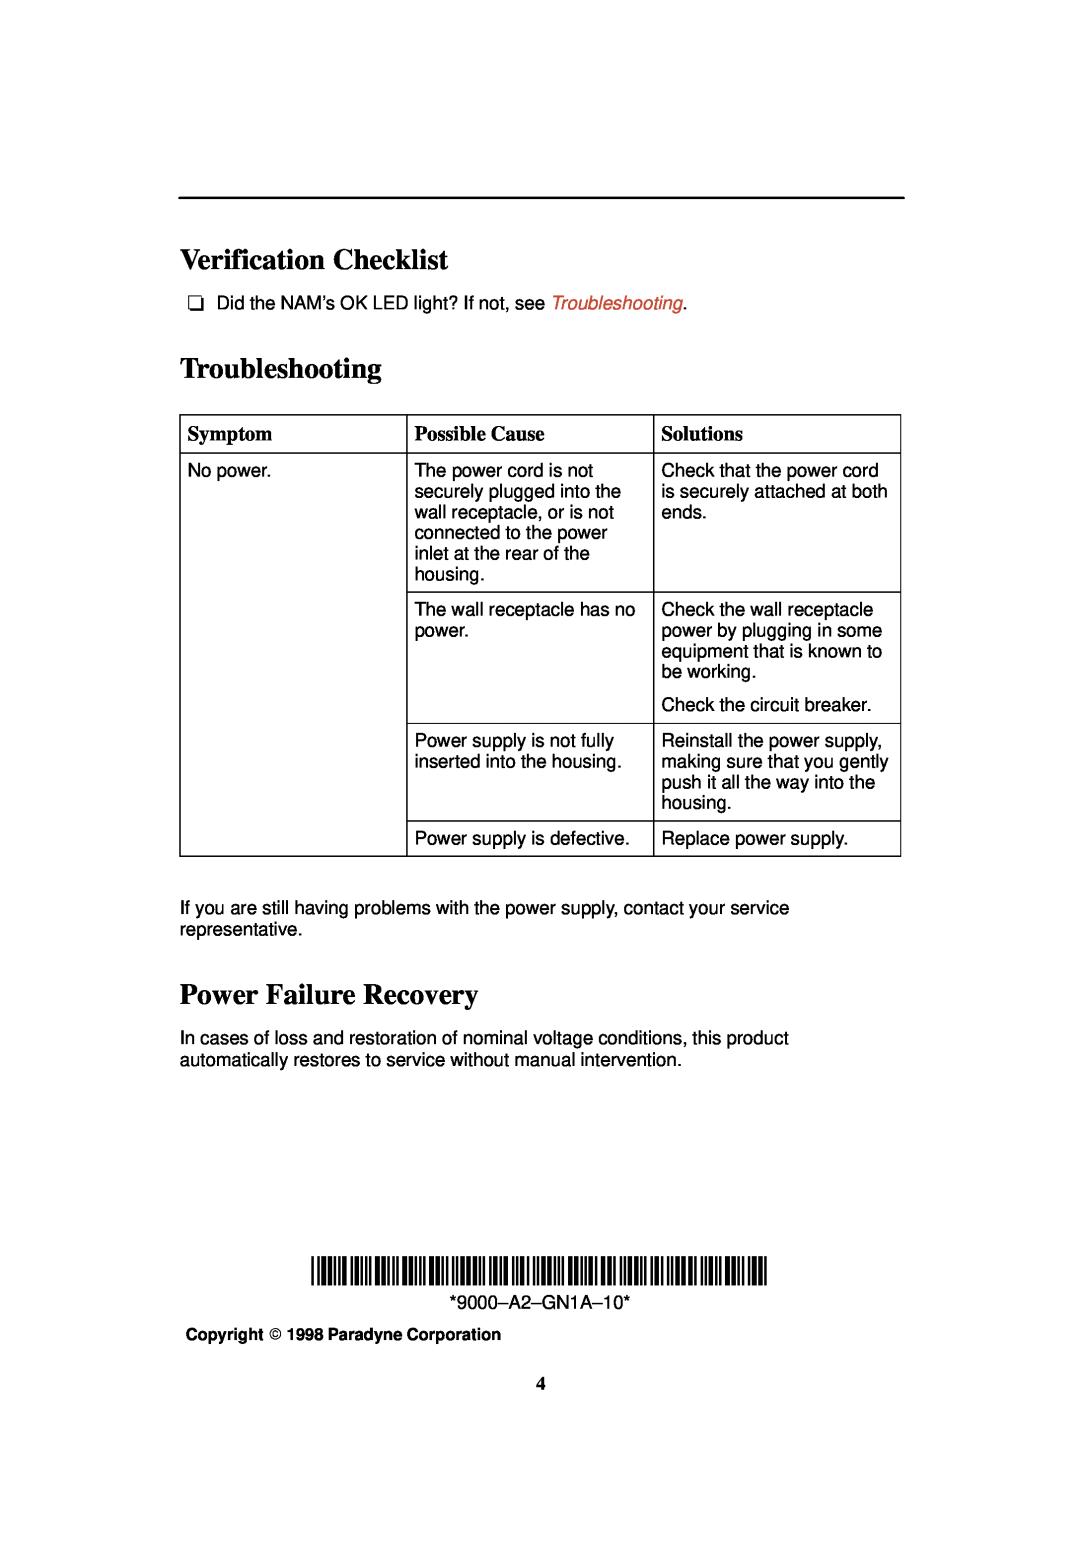 Paradyne 496-15149 Verification Checklist, Troubleshooting, Power Failure Recovery, Symptom, Possible Cause, Solutions 